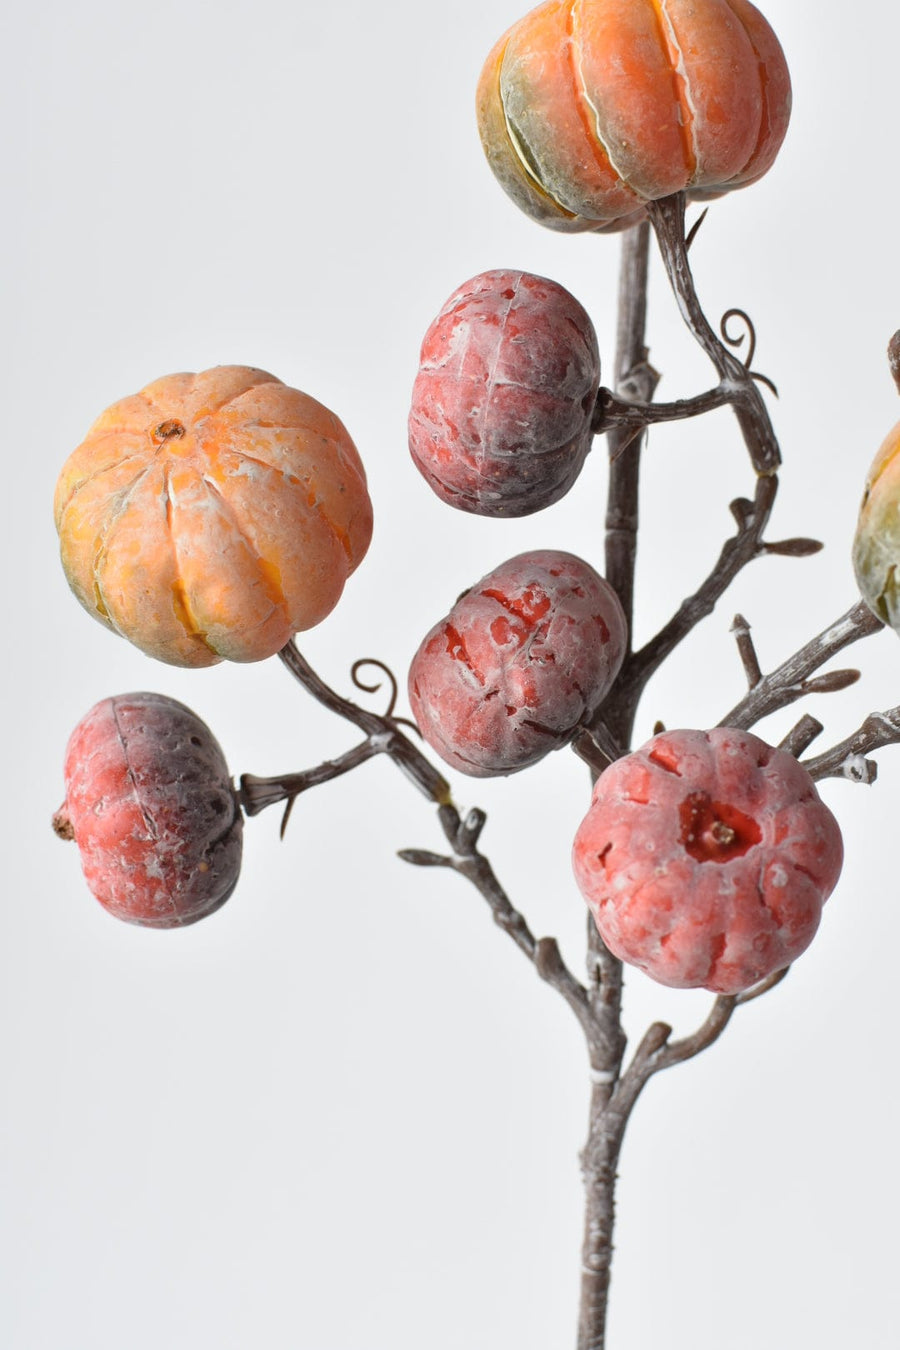 29" Faux White-Washed Pumkins On A Branch: Orange + Red